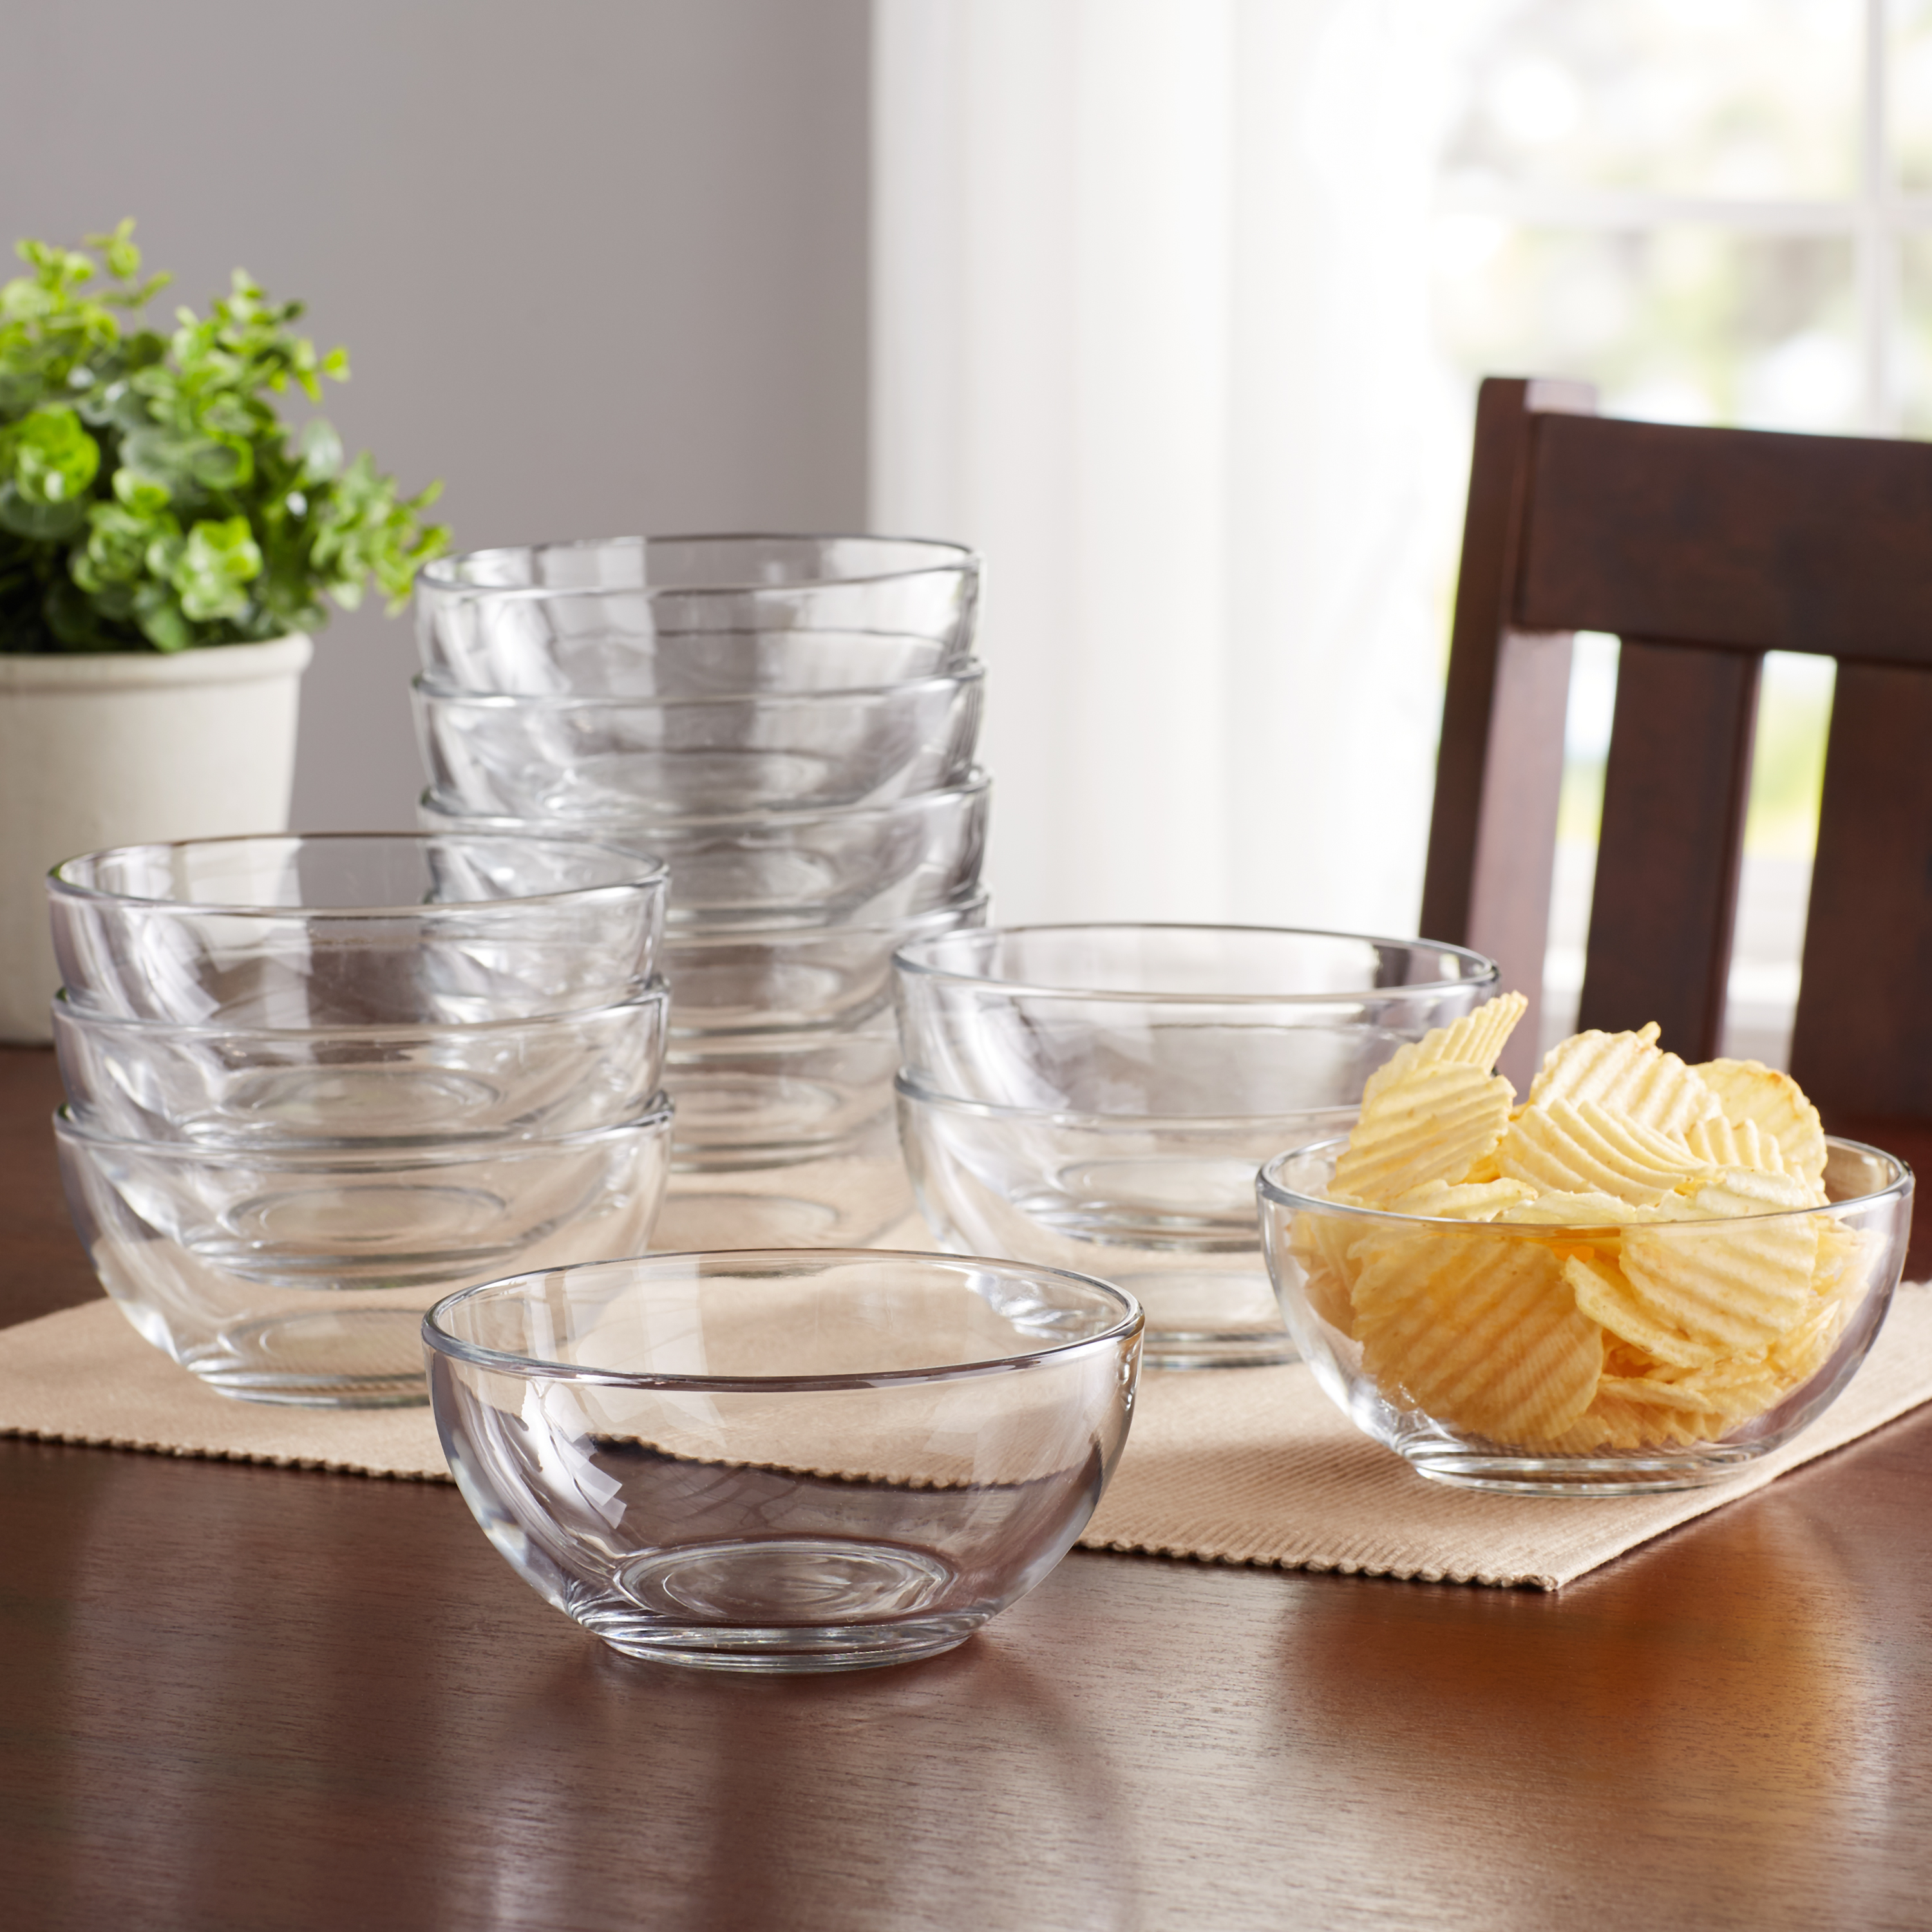 Mainstays Round Glass Bowls Catering Pack, Set of 12 - image 2 of 10